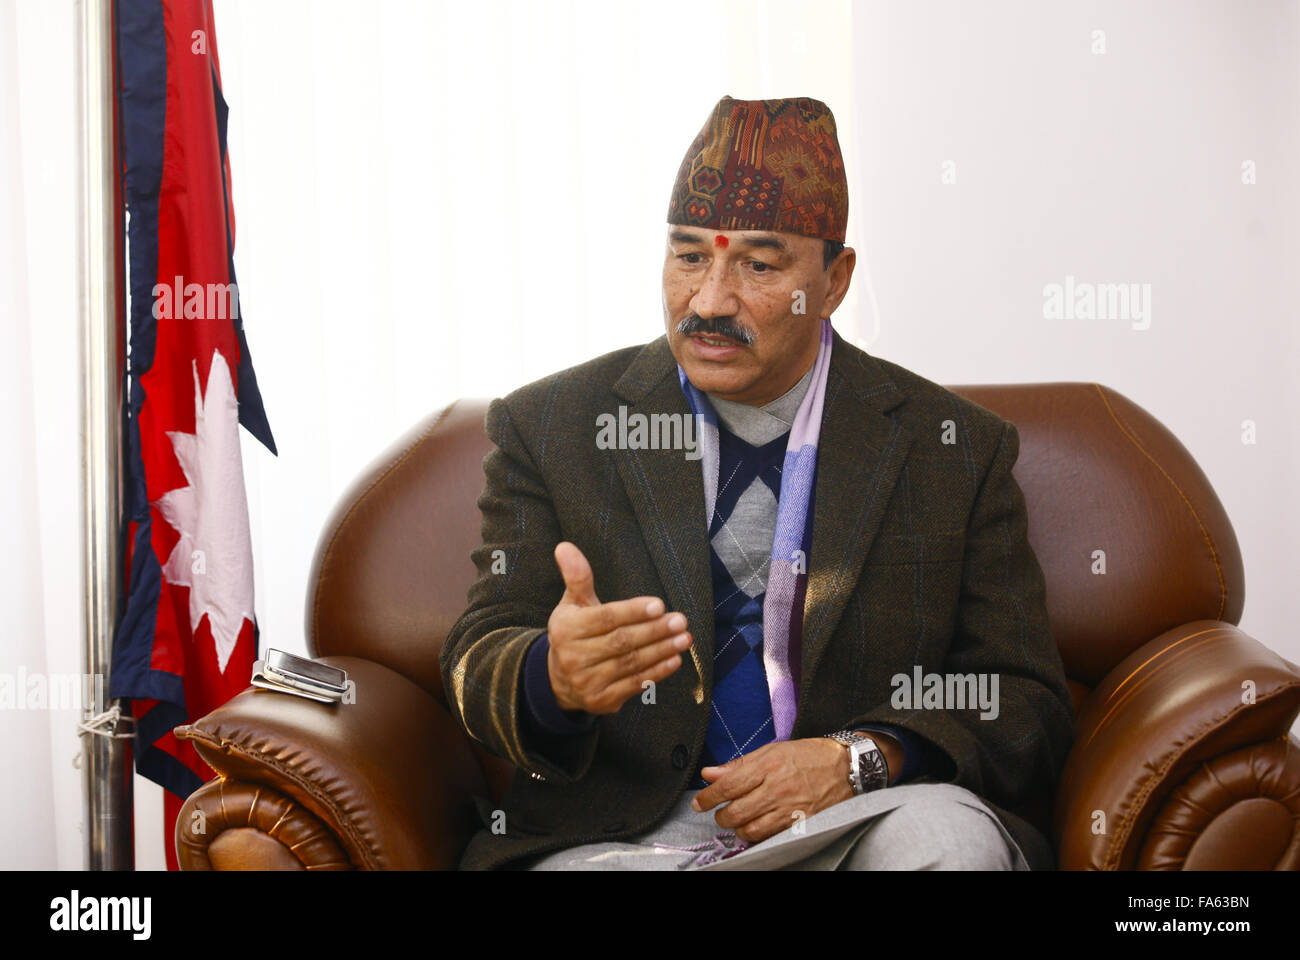 Kathmandu, Nepal. 22nd Dec, 2015. Nepal's Deputy Prime Minister and Minister for Foreign Affairs Kamal Thapa receives an interview with Xinhua before his five-day official visit to China, in Kathmandu, Nepal, Dec. 22, 2015. Kamal Thapa will leave for China on Wednesday. During the visit, Nepal is expected to seal a trade and transit agreement with China as well as finalize the details for importing petroleum products from the northern neighbor on a commercial basis. Credit:  Pratap Thapa/Xinhua/Alamy Live News Stock Photo